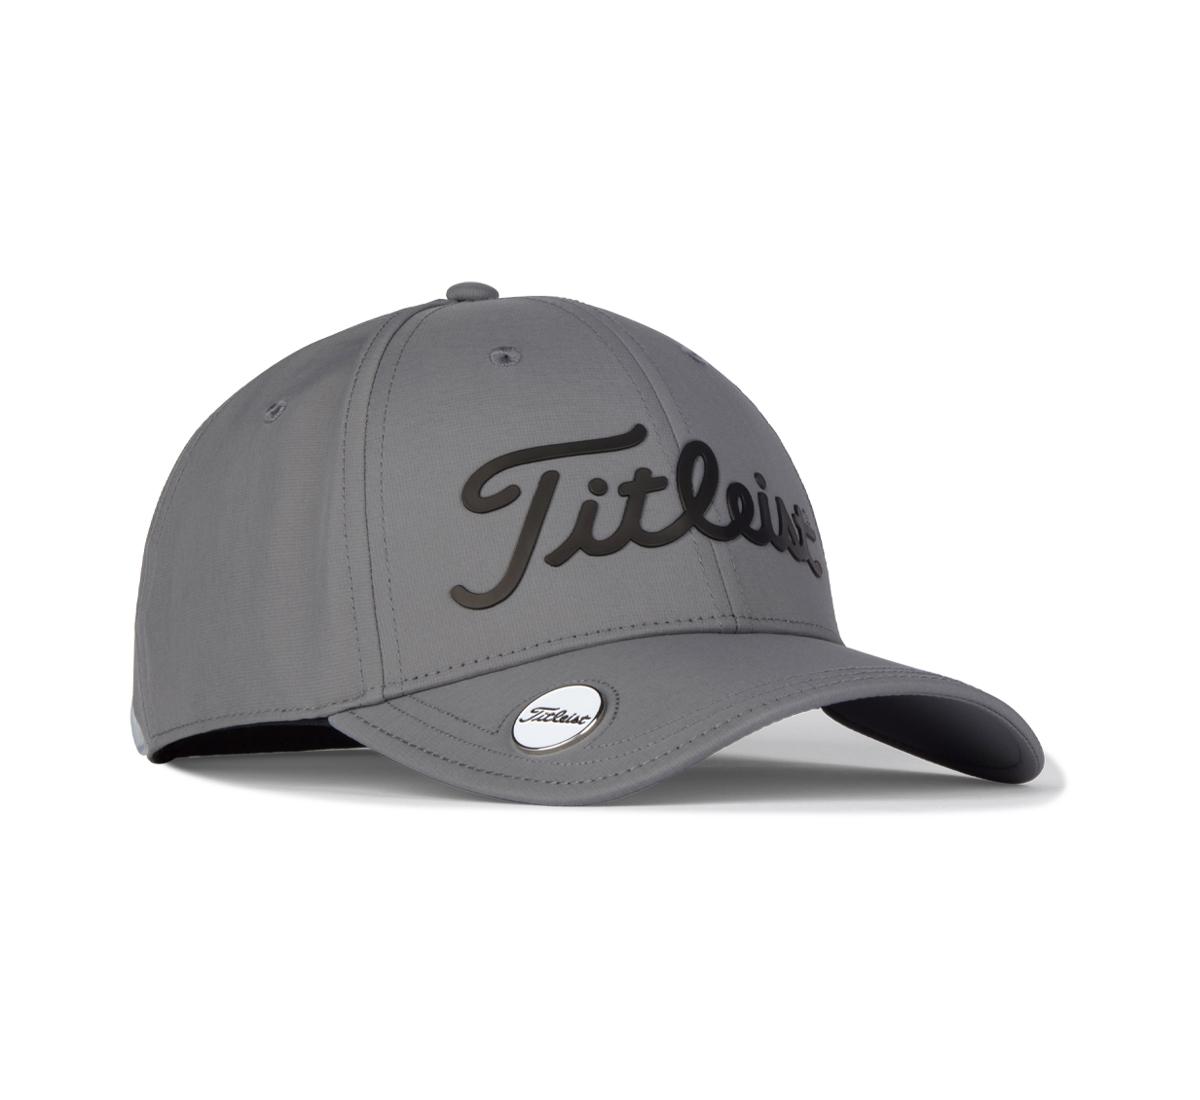 Titleist Players Performance Ball Marker Hat - Charcoal/Black